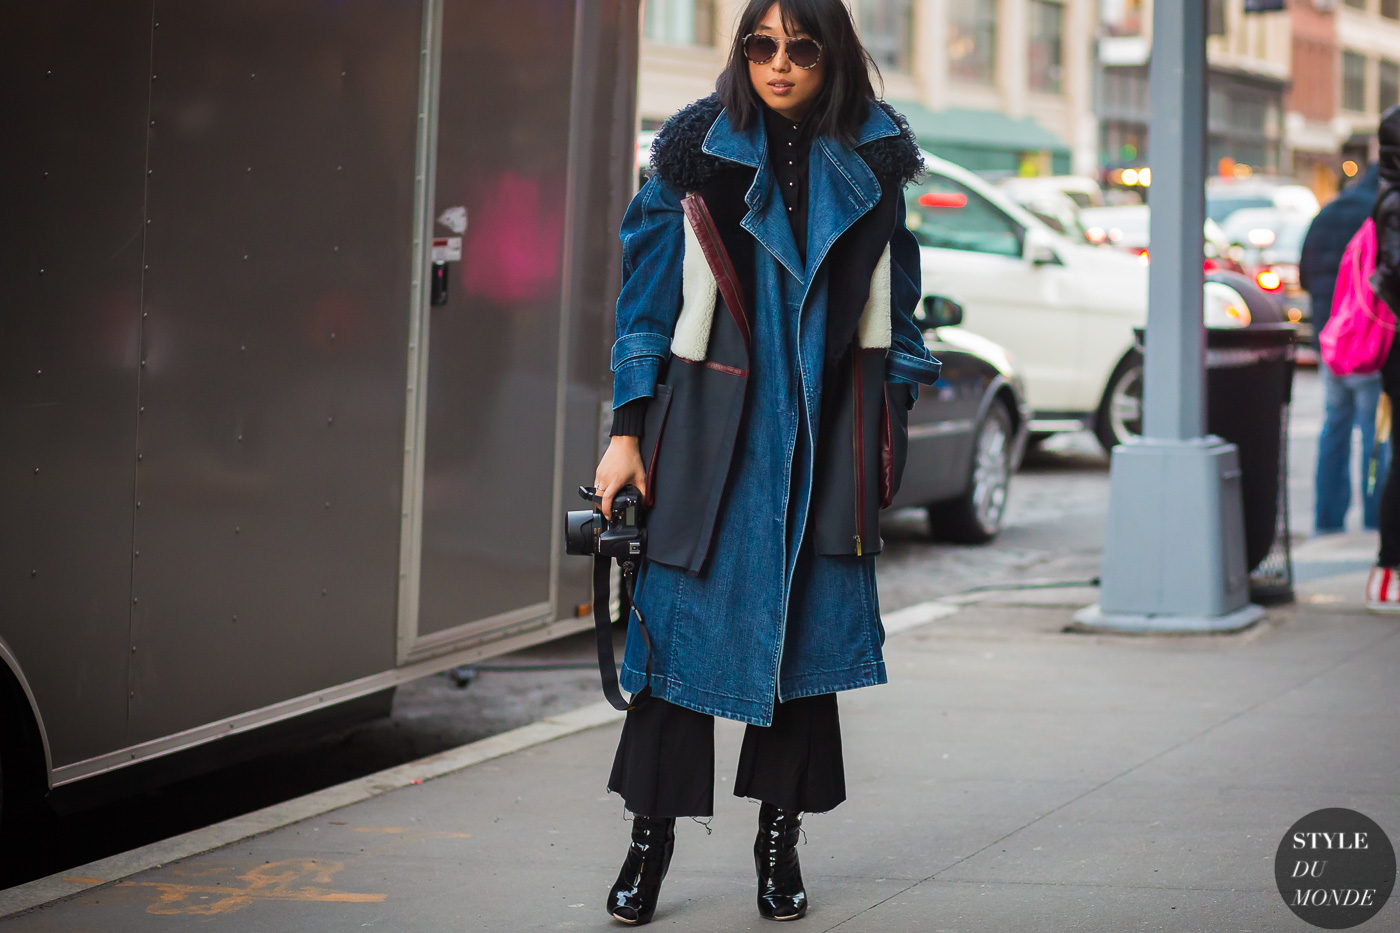 margaret-zhang-by-styledumonde-street-style-fashion-photography